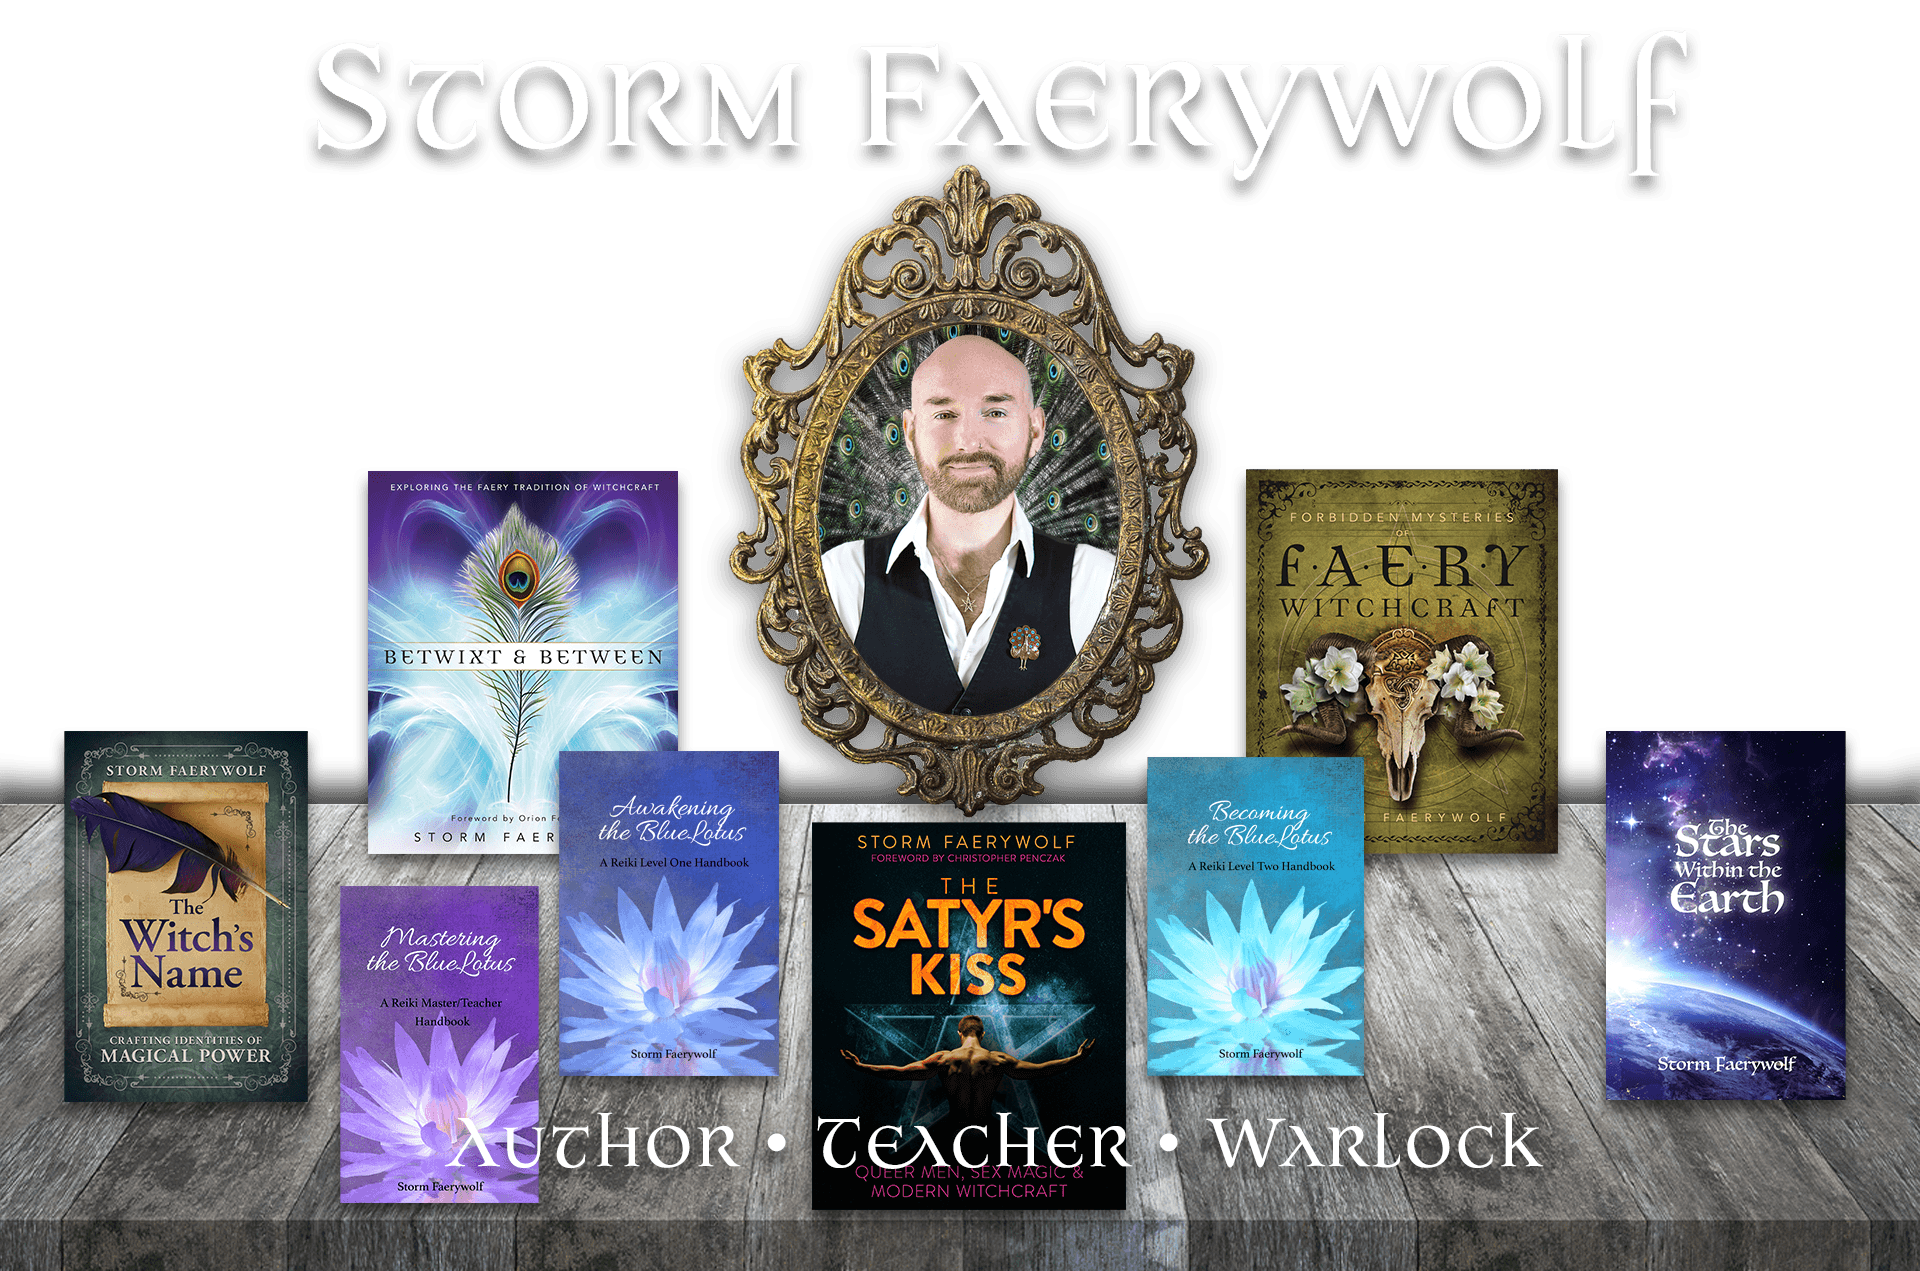 Author, teacher, and warlock Storm Faerywolf writes about Witchcraft, Occultism, Folk magic, Reiki, and Queer Spirituality. Books • Essays • Poetry • Art • Spells • Classes • Private sessions